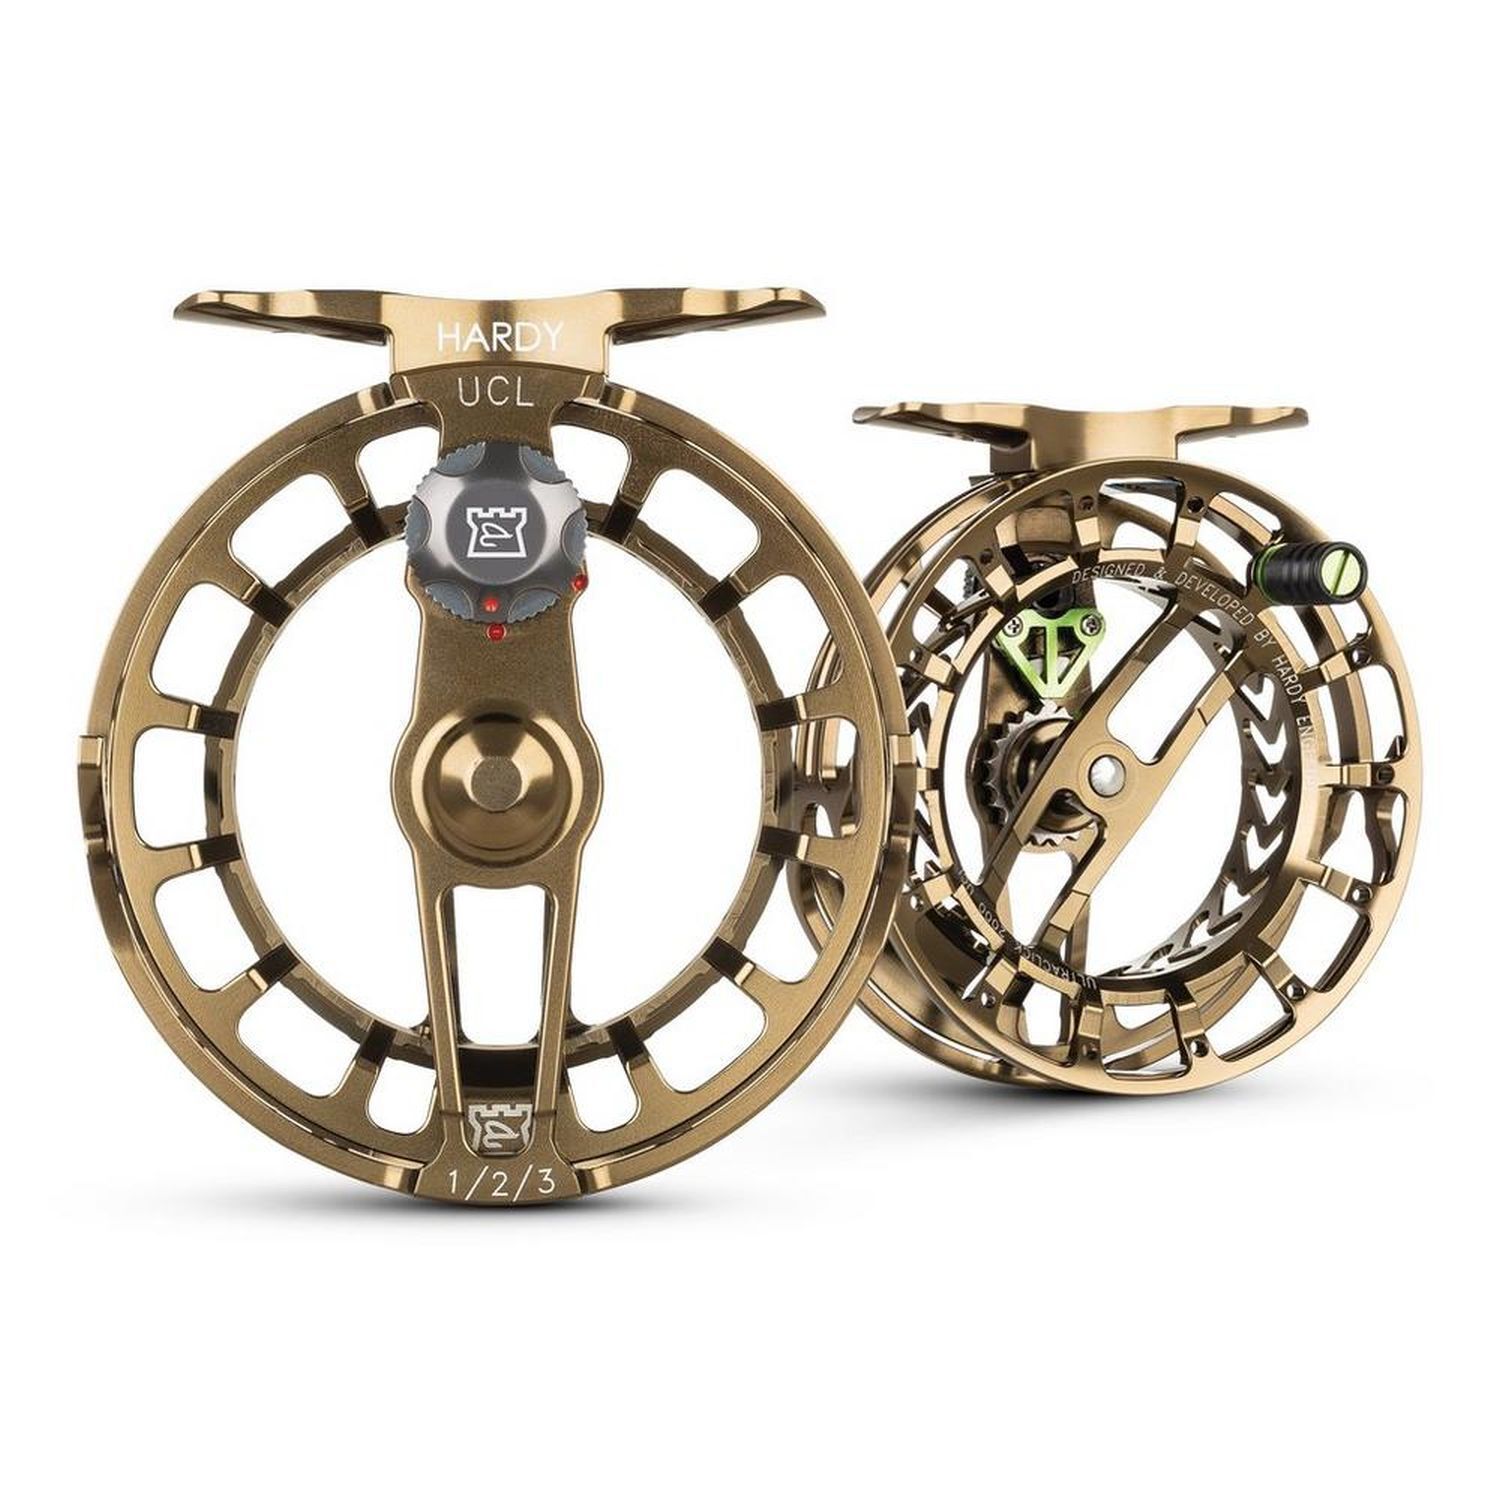 Hardy Ultraclick UCL Fly Reel online bobleisure